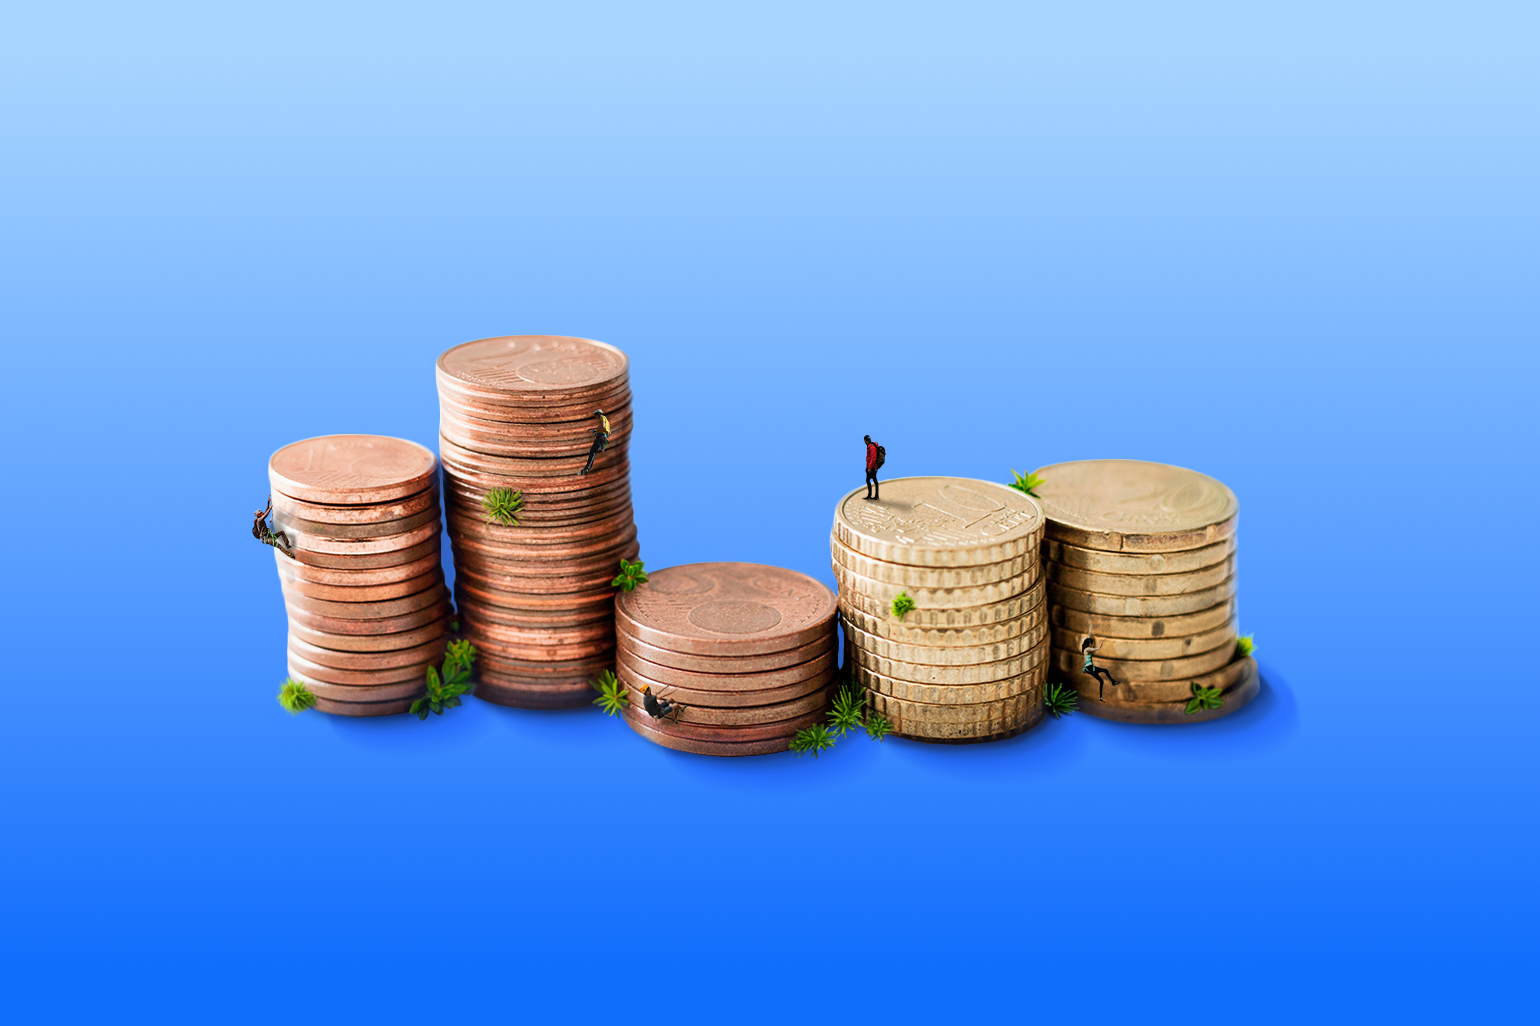 Stacks of variously sized coins, some featuring small plants growing around them, sit against a gradient blue background. A tiny figure with a flag stands atop the tallest stack on the far right, illustrating economic impact in an engaging data visualization.